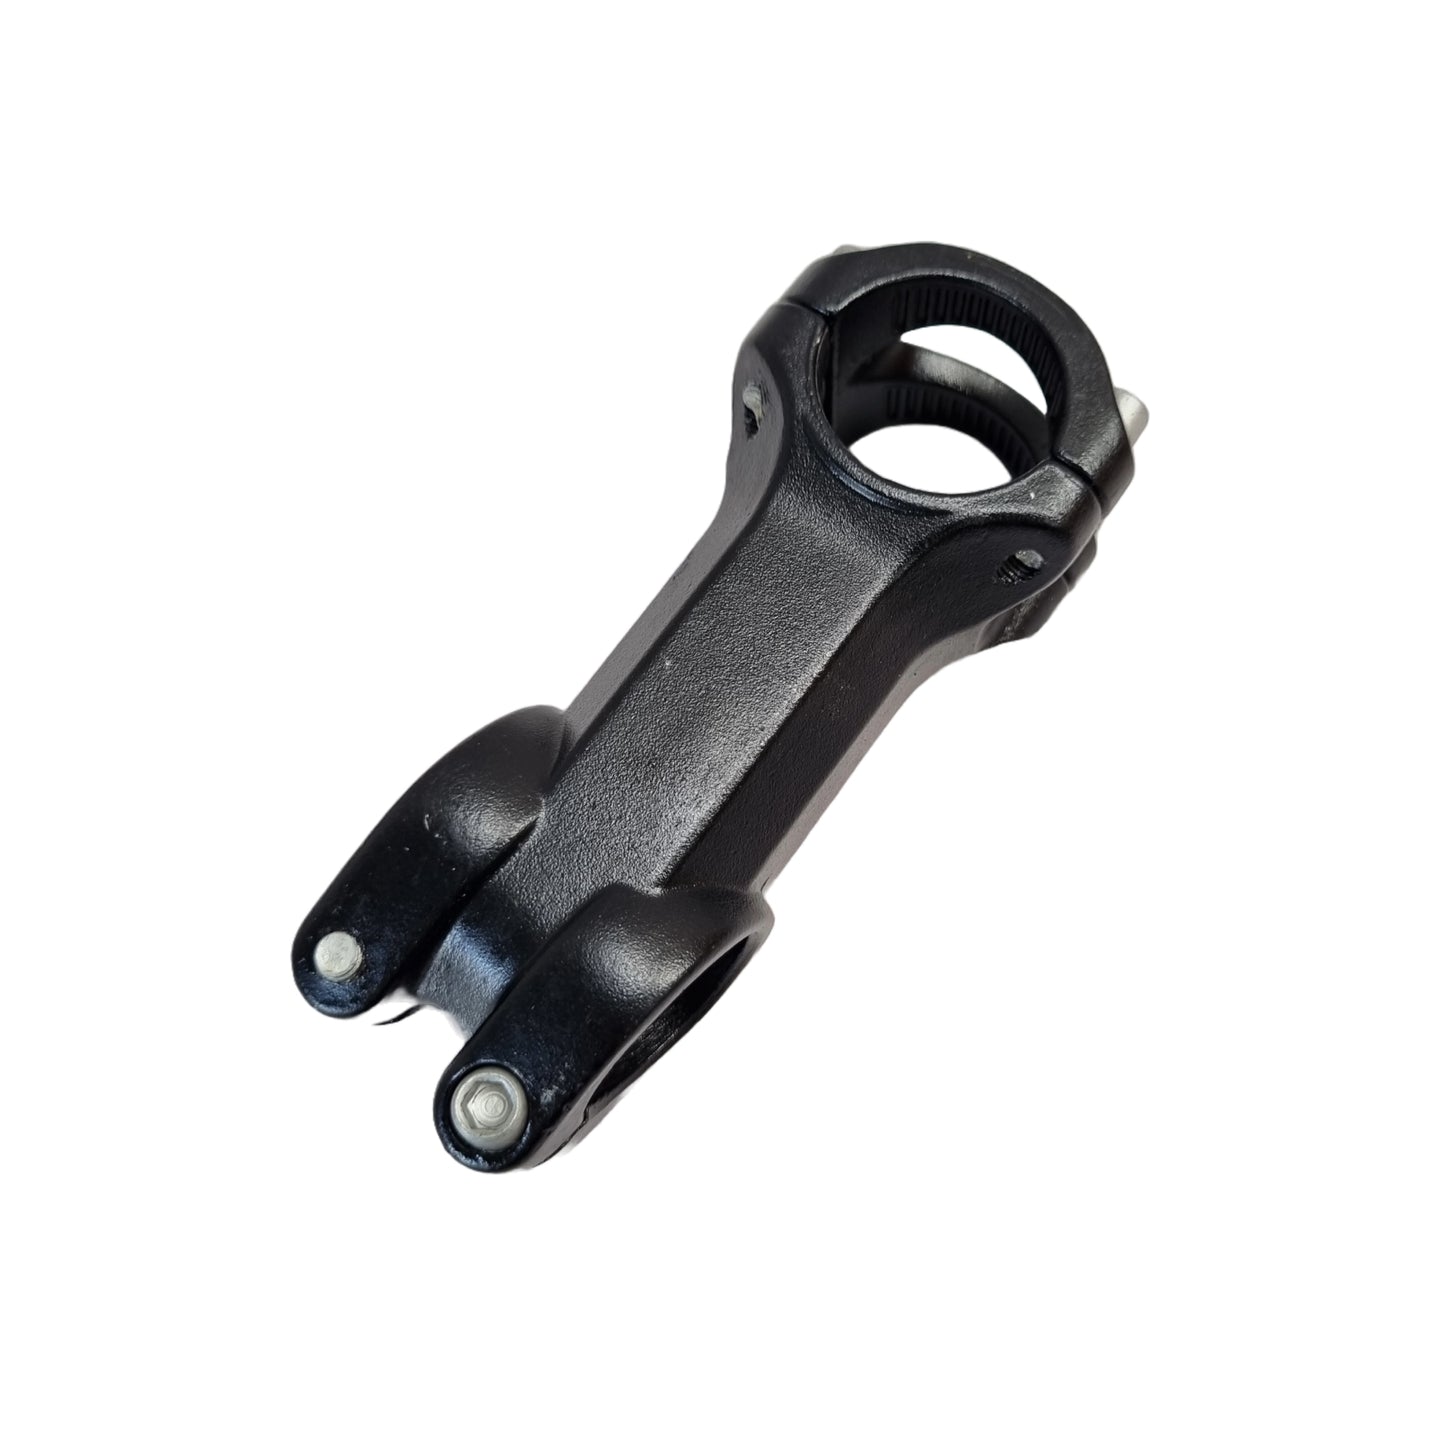 Bicycle alloy stem for threadless fork spare part angle view by omobikes